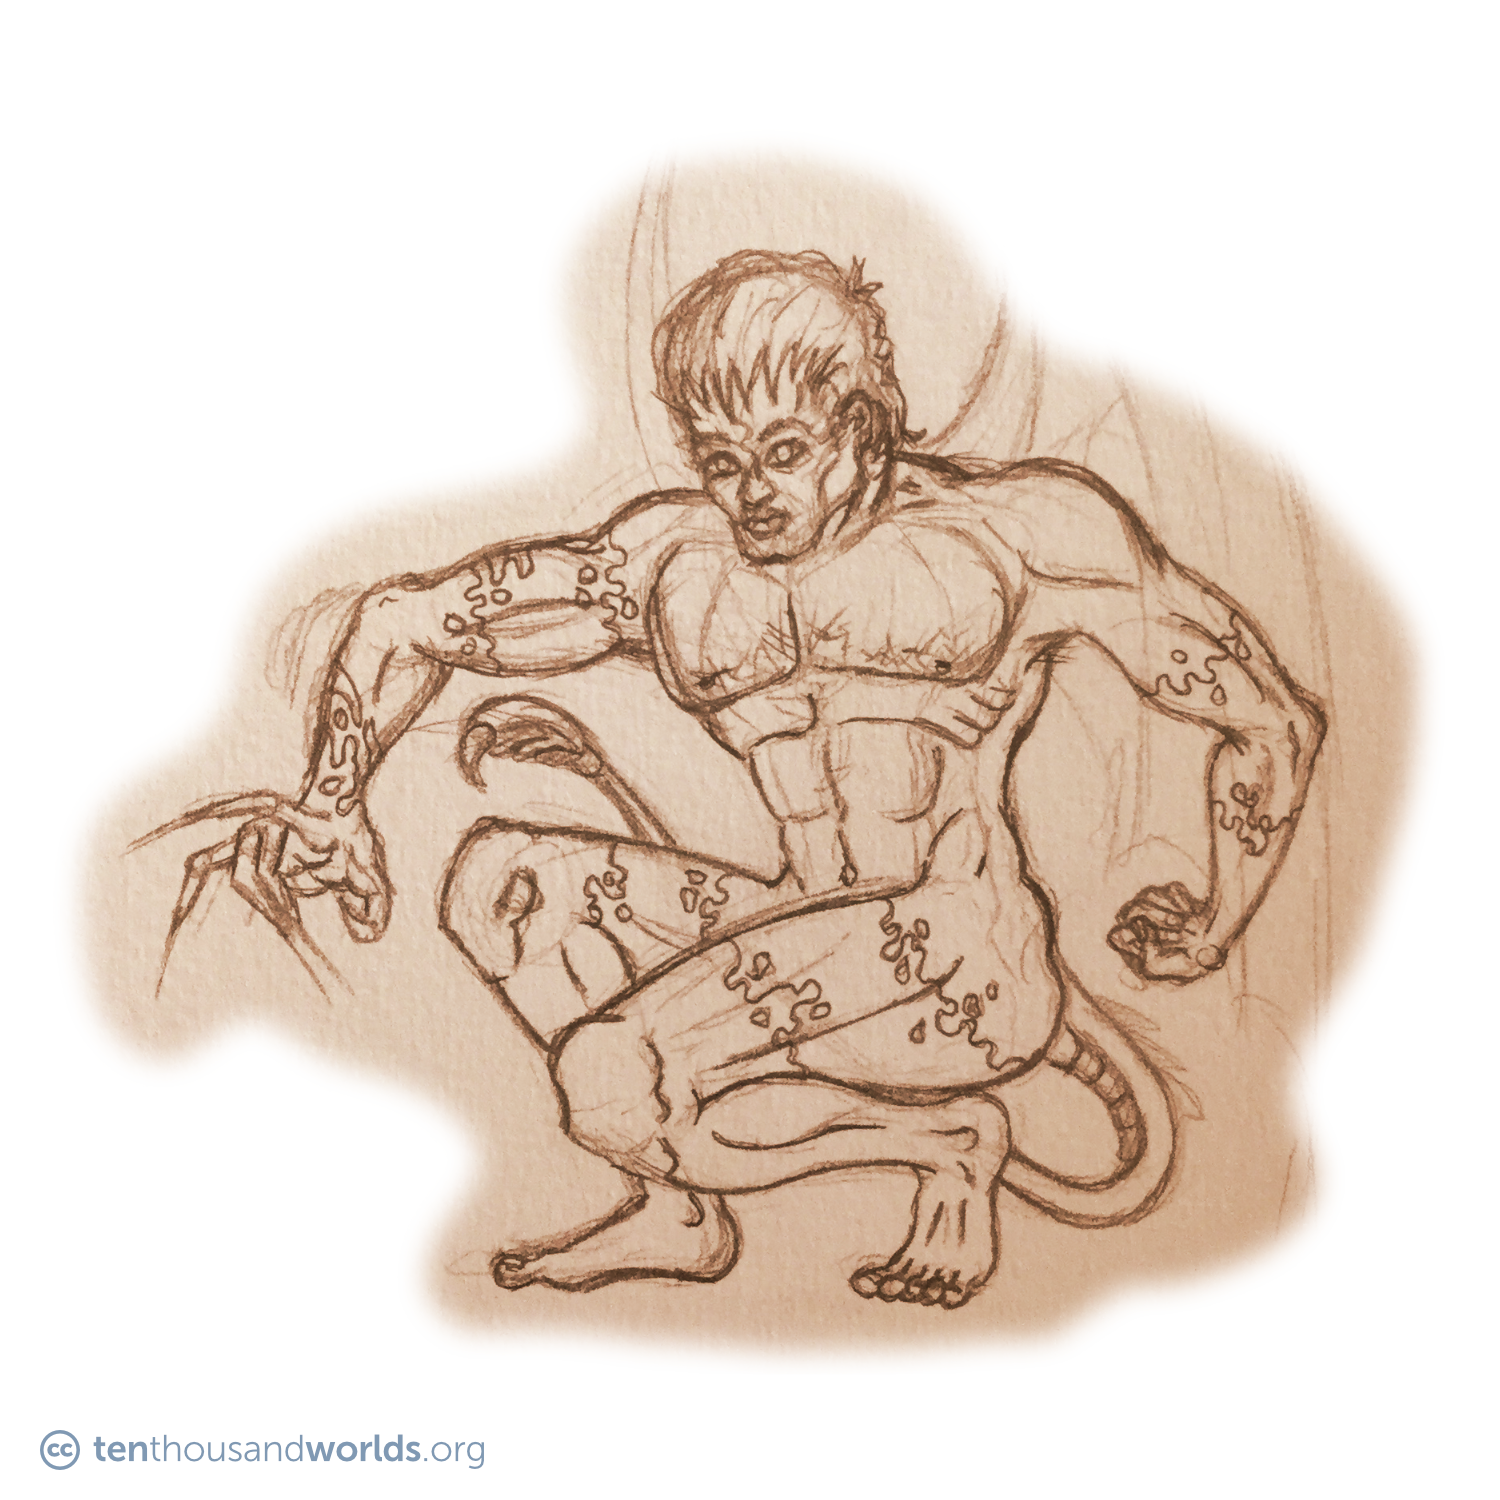 A pencil sketch of a crouching human-like figure covered in changing skin patterns, sprouting bat wings and a scorpion tail, with long claws growing from the left hand.